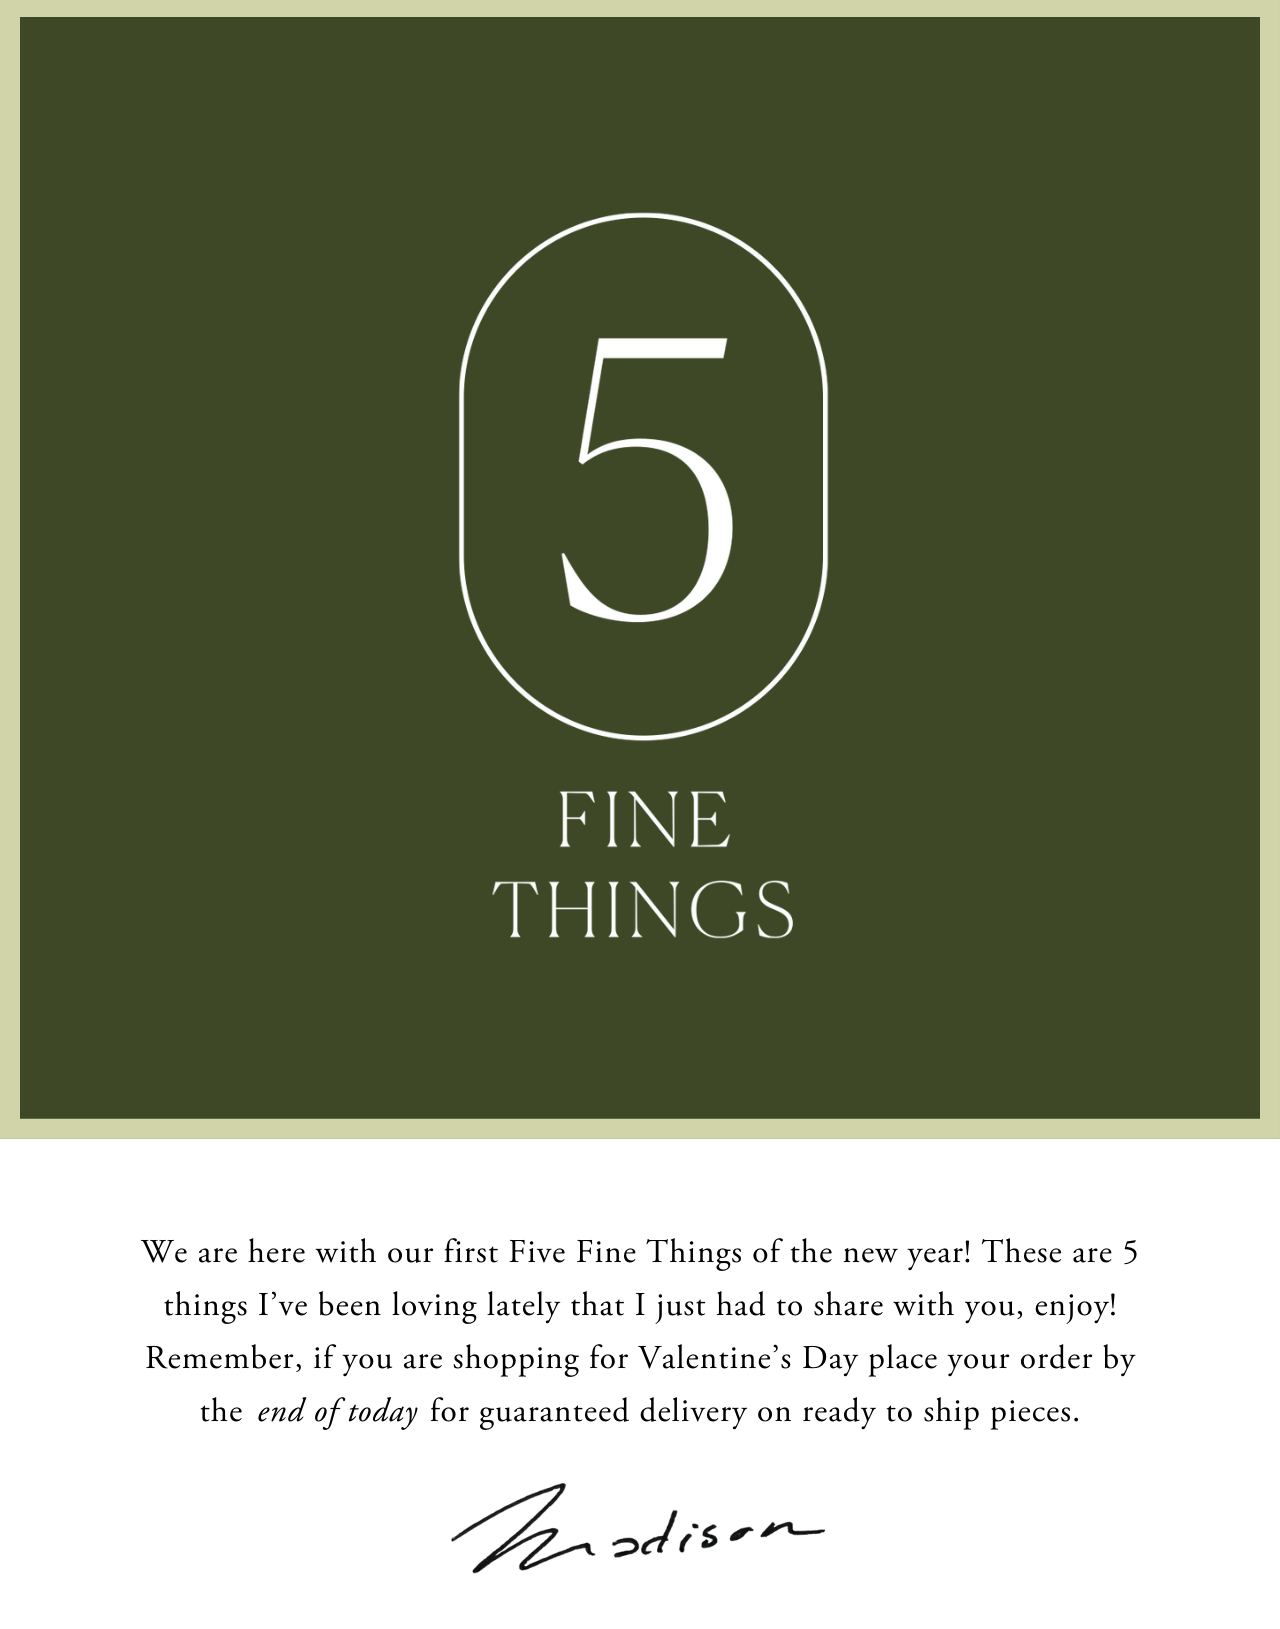 Five Fine Things - February